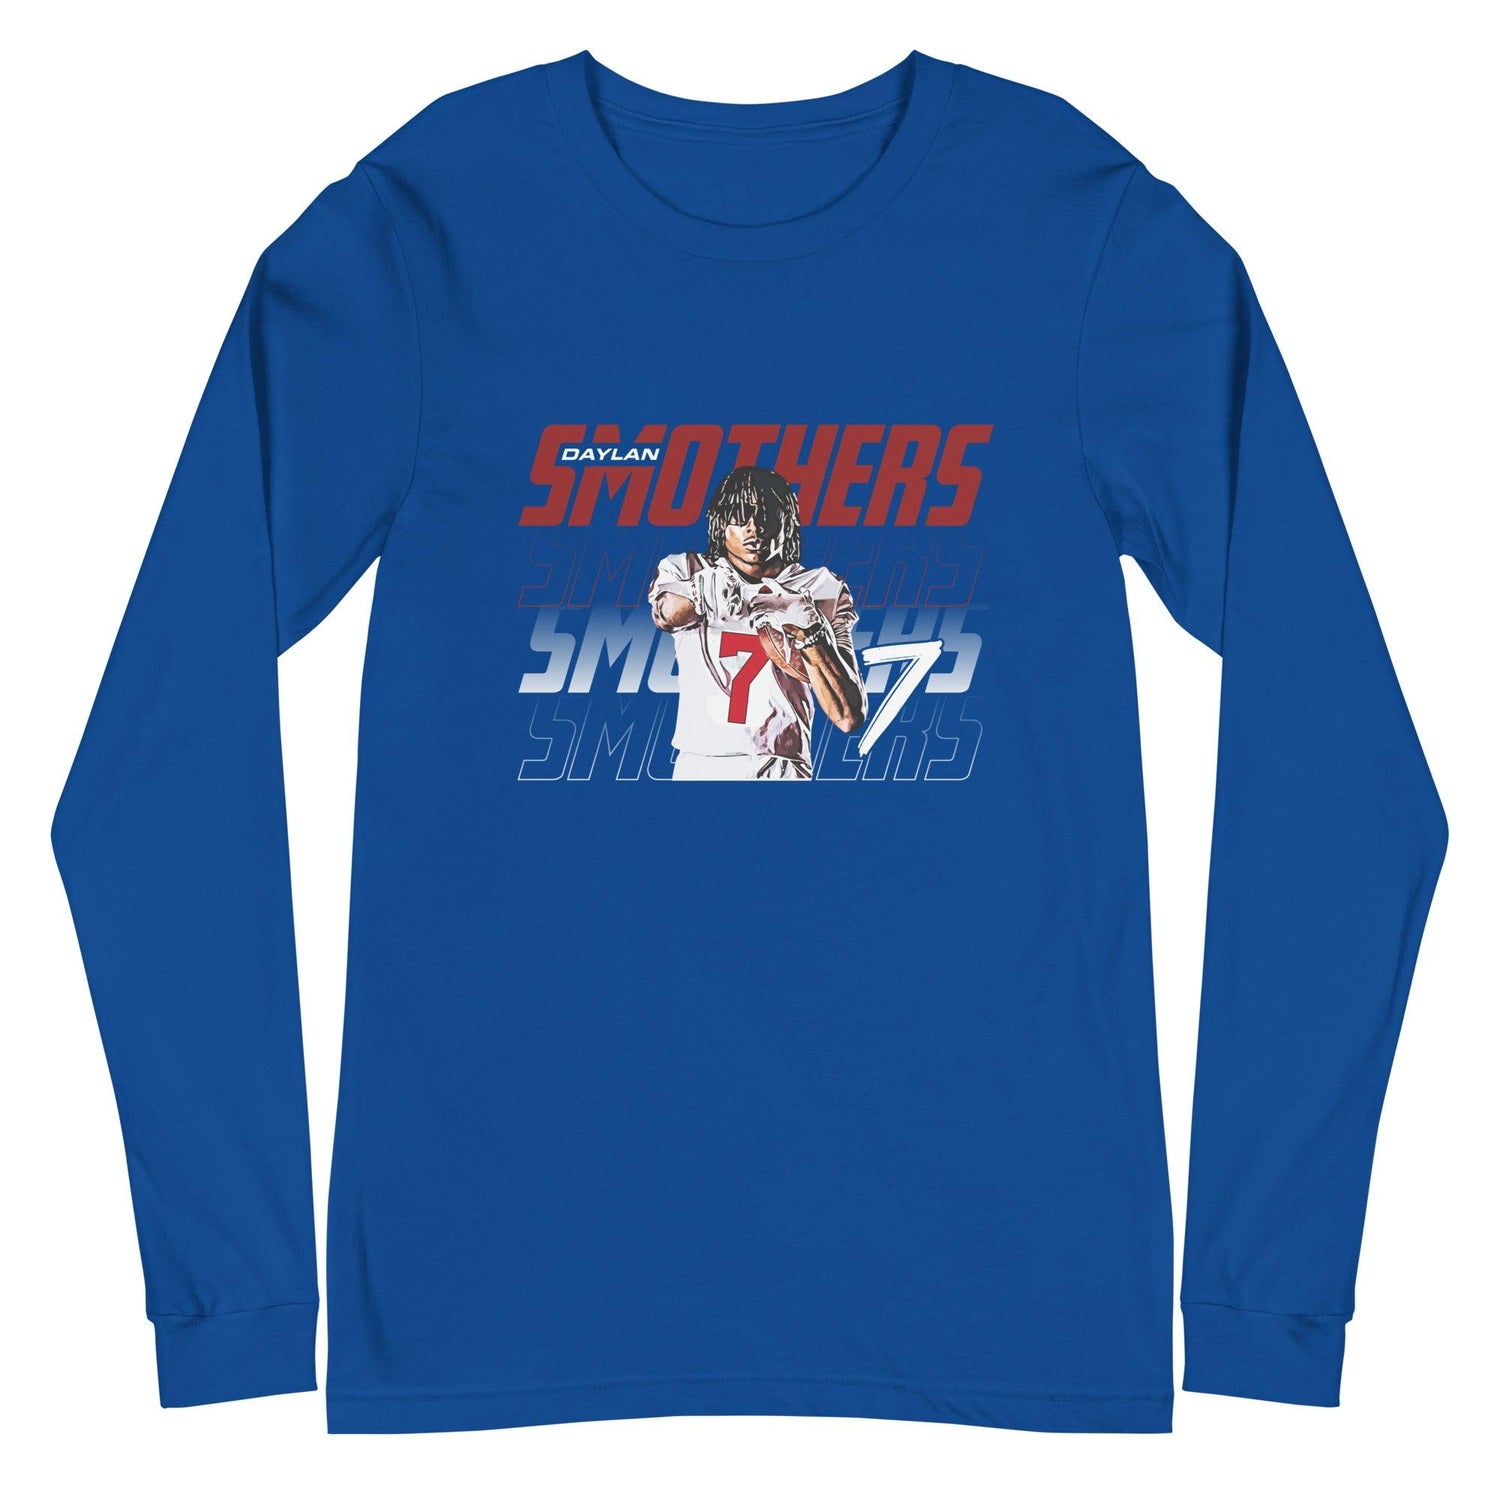 Daylan Smothers "Gameday" Long Sleeve Tee - Fan Arch